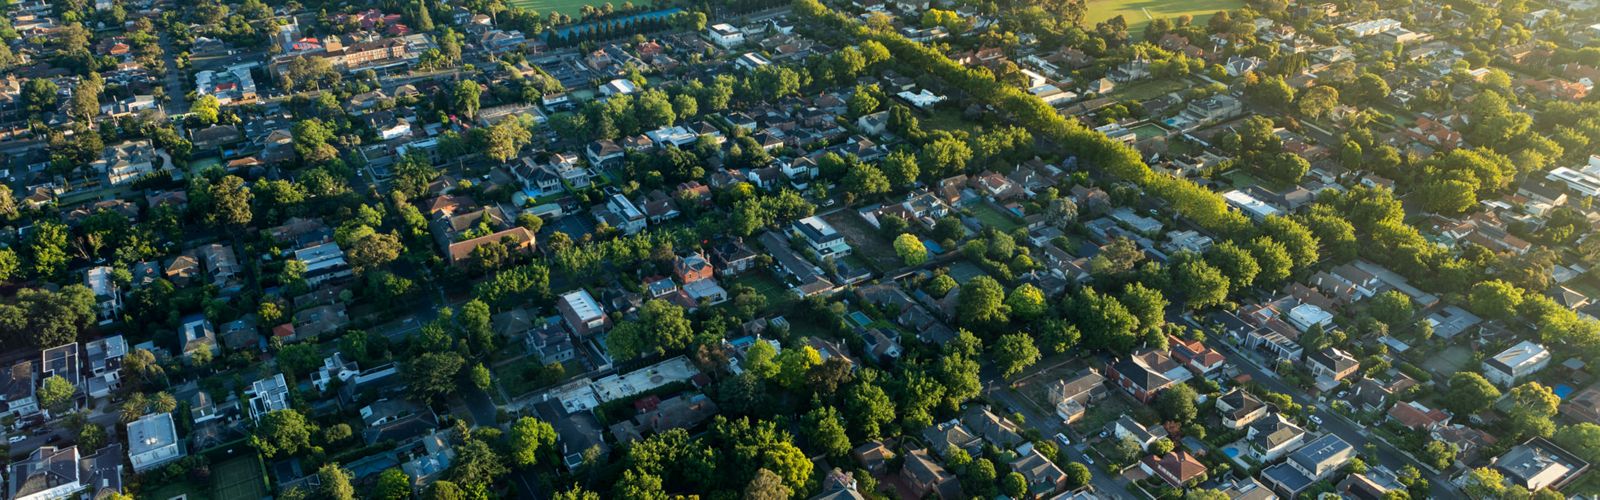 aerial view of suburban neighborhood with houses and buildings and lots of trees throughout